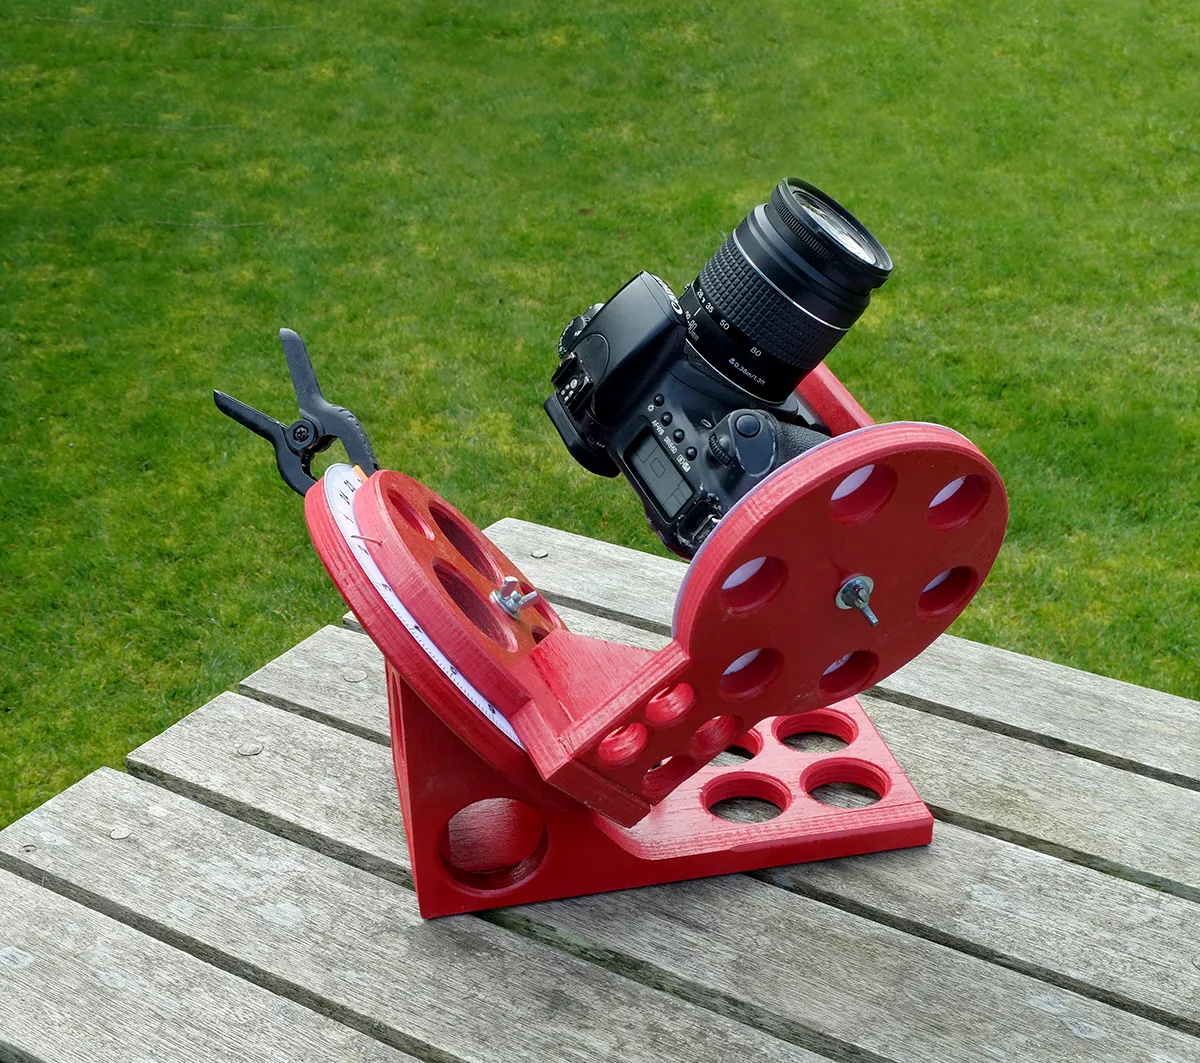 A homemade EQ camera mount for astrophotography. Credit: Mark Parrish